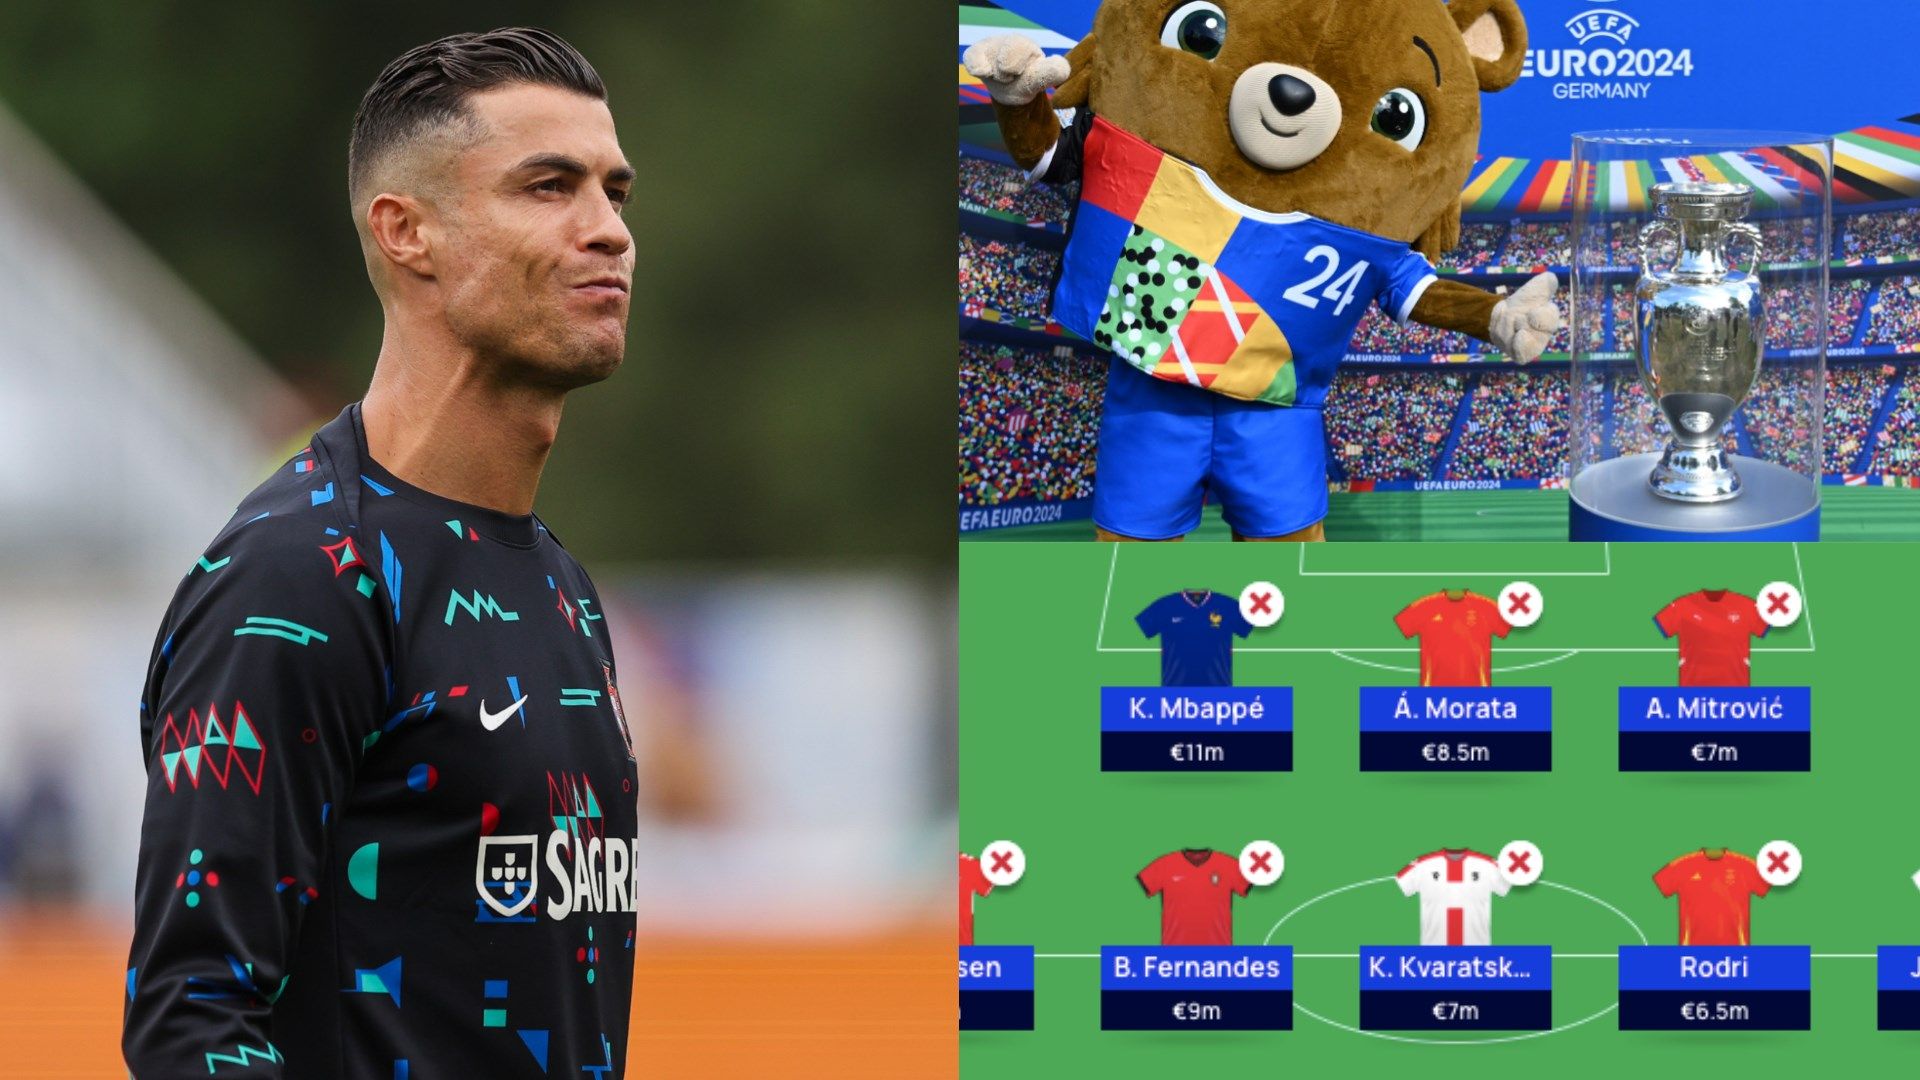 Euro 2024 fantasy football: Tips, best players, rules, prizes & guide | Goal.com US